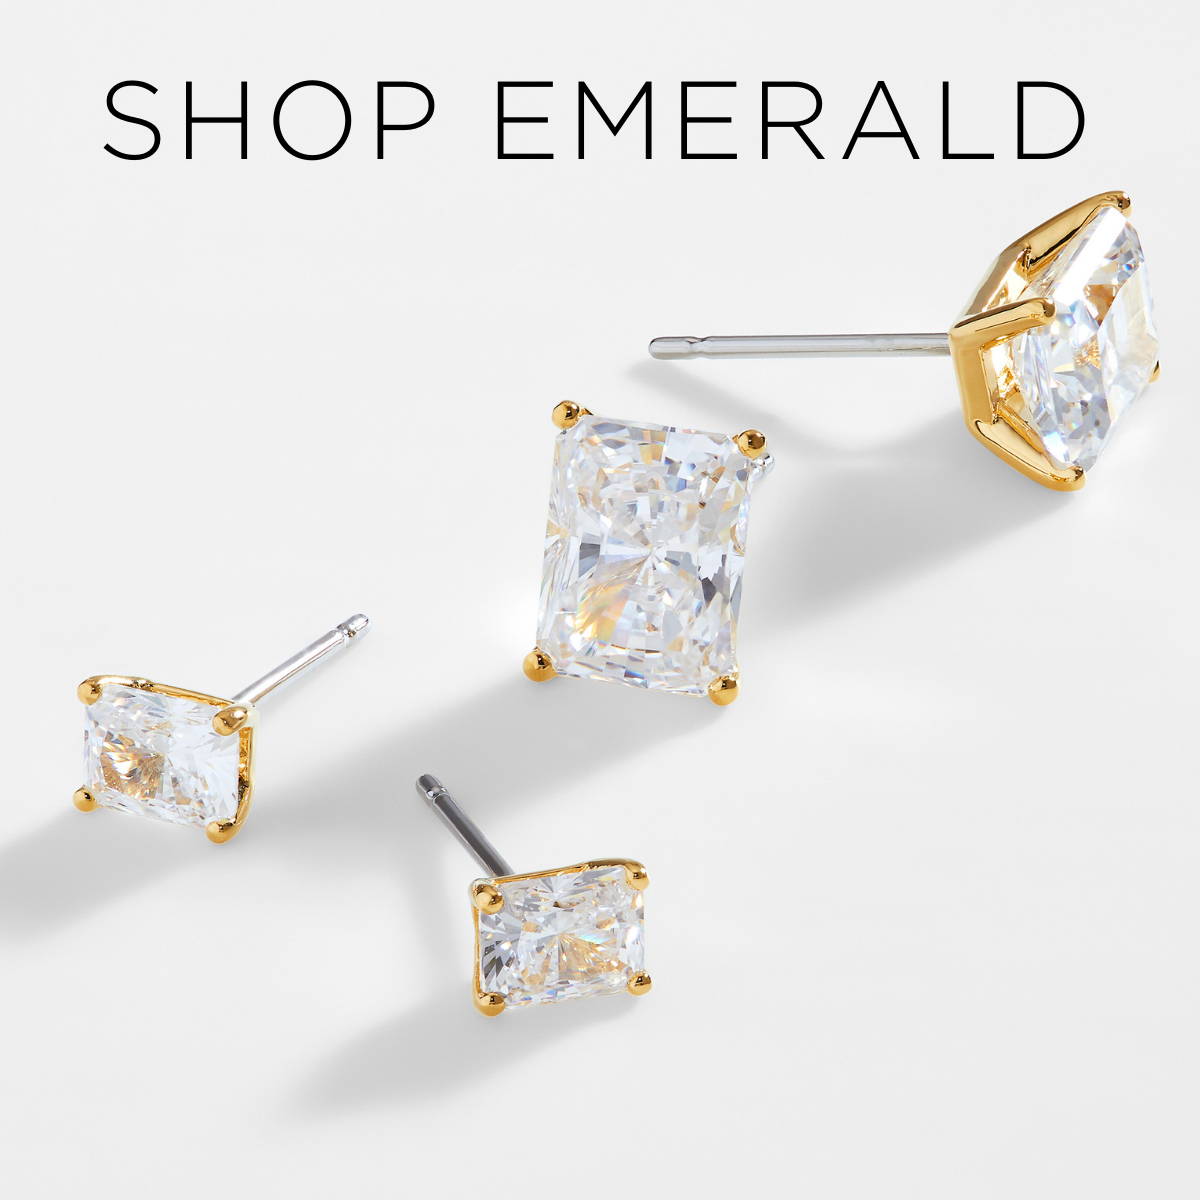 Click to shop emerald stone styles